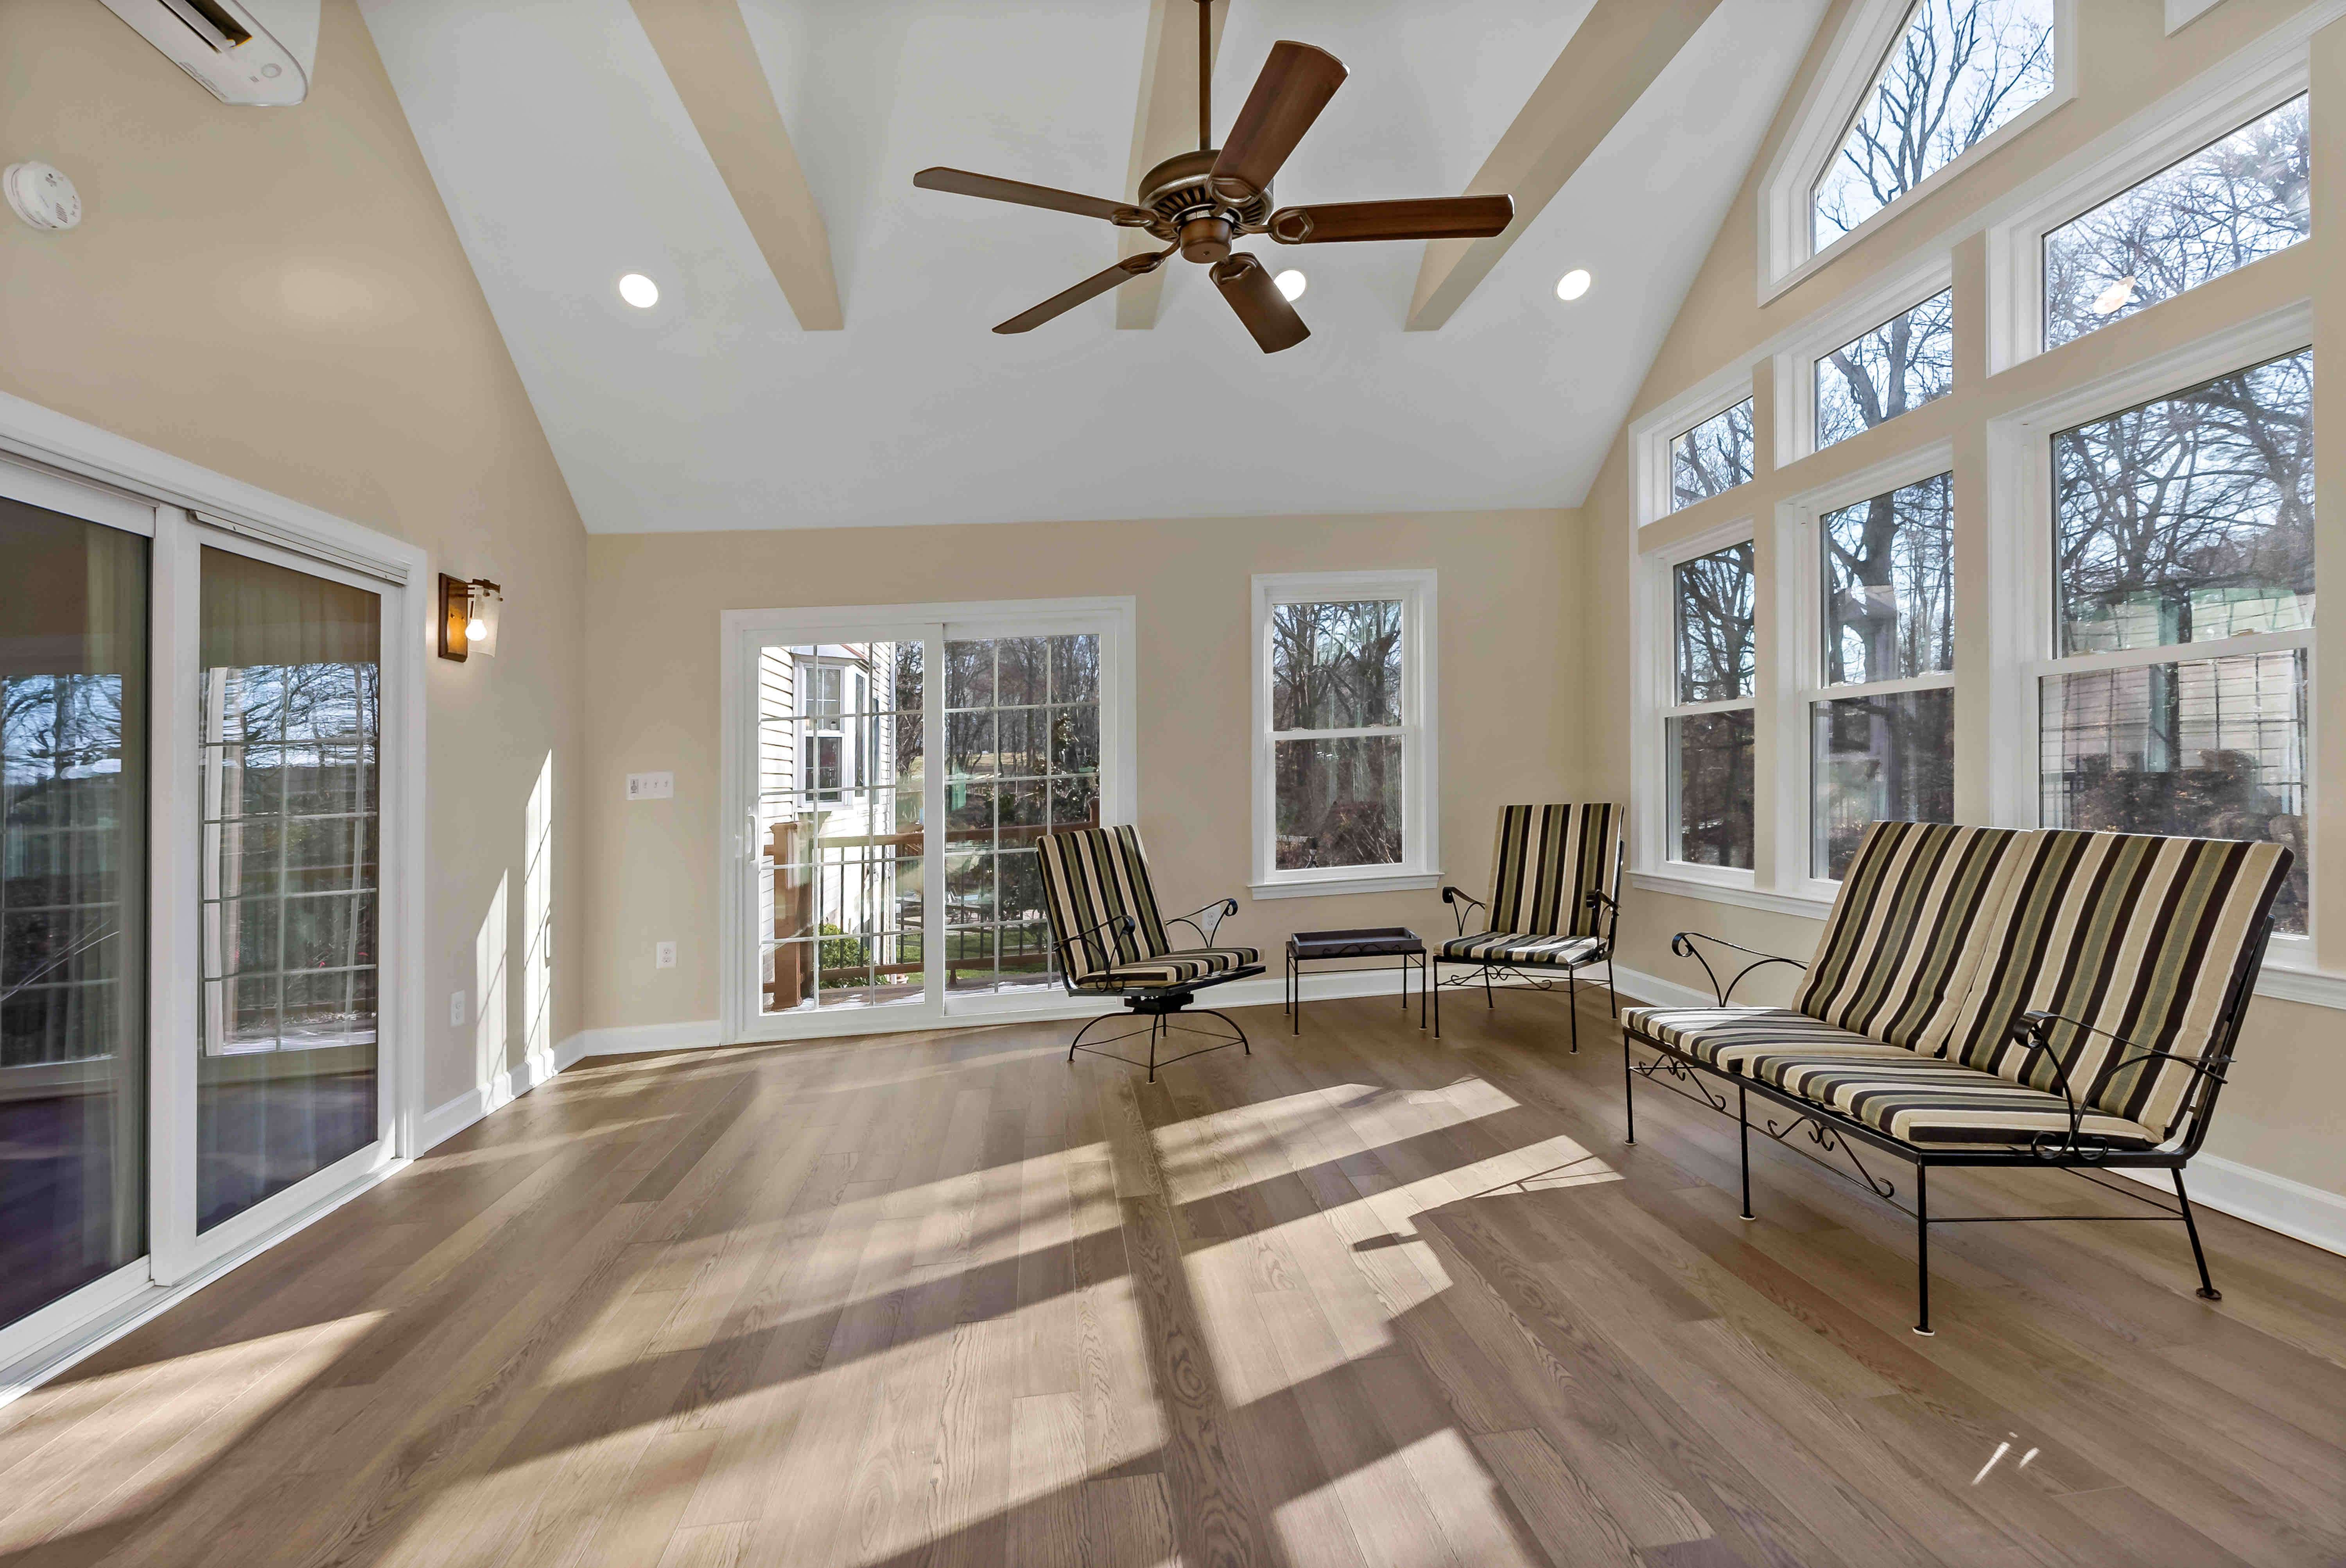 Ceiling fan and large windows in light-fillled multi-purpose room